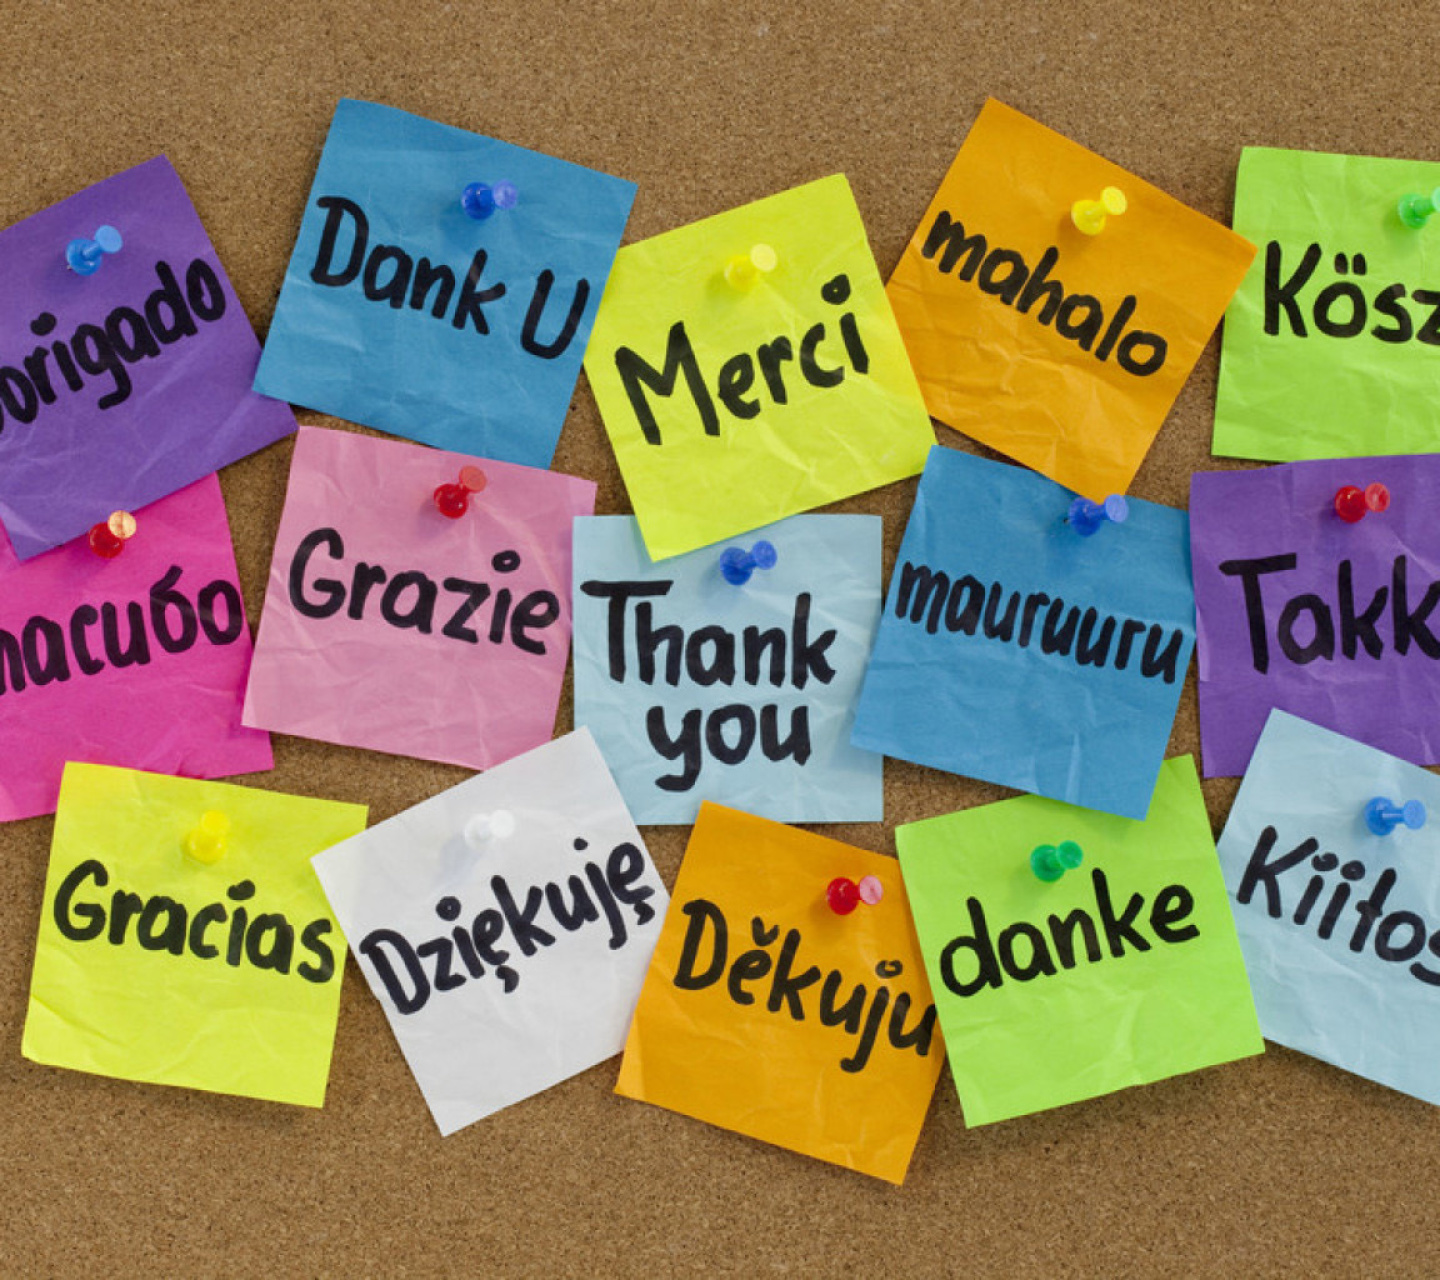 How To Say Thank You in Different Languages screenshot #1 1440x1280